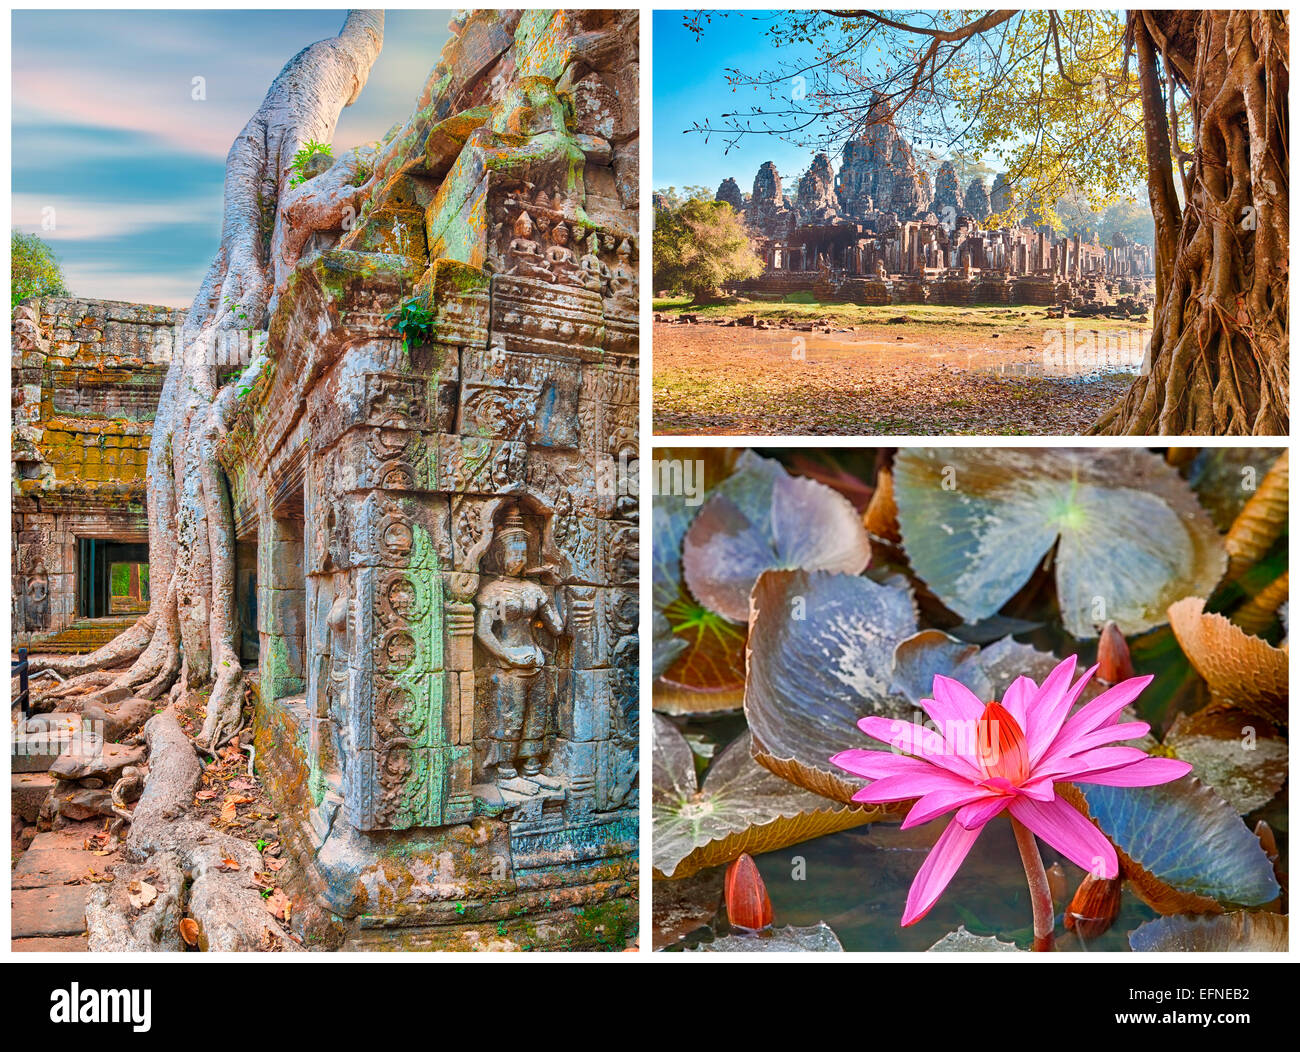 Ancient tree roots and lotus flower, Angkor, collage Stock Photo